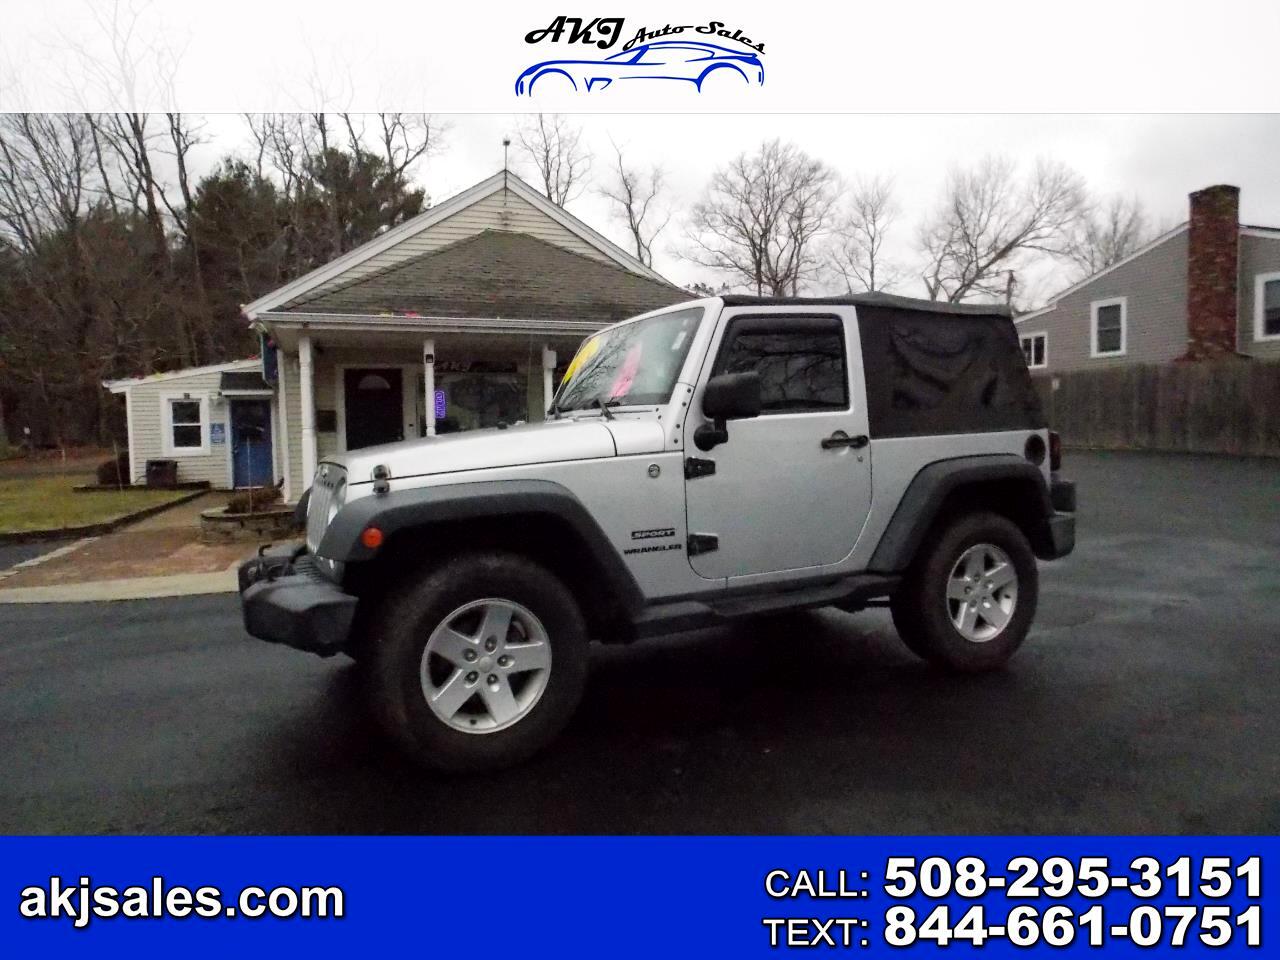 Used 2012 Jeep Wrangler 4WD 2dr Sport for Sale in West Wareham MA 02576 AKJ  Auto Sales